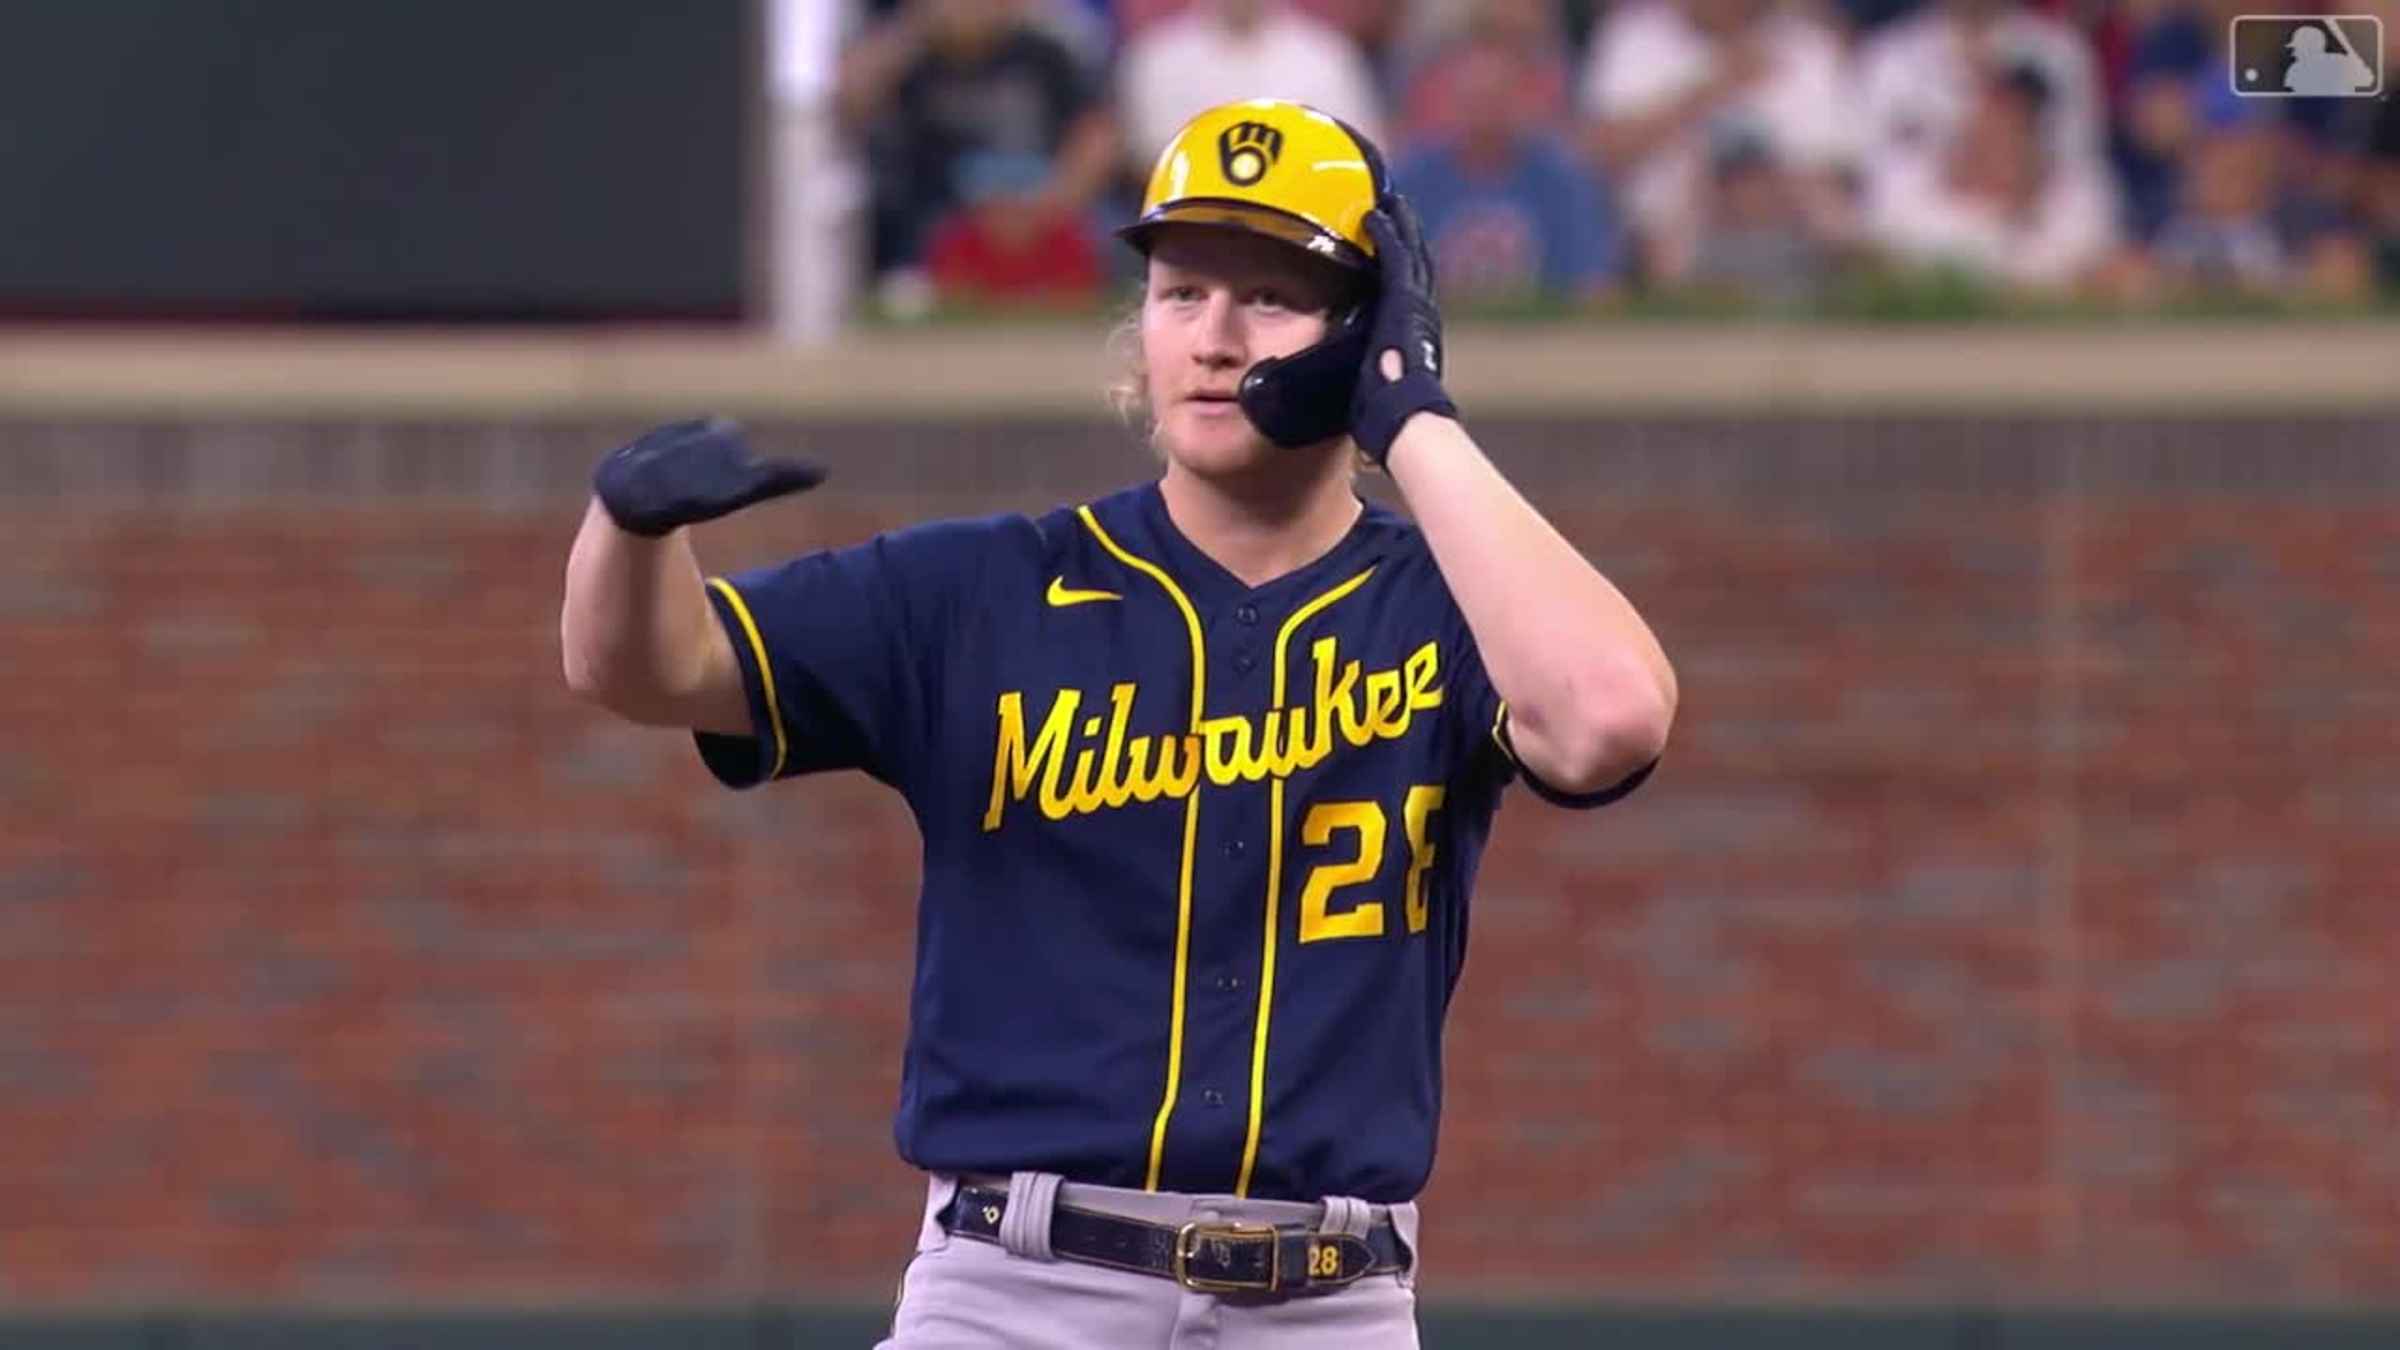 Former Wolverine Sabo Headed to Reds Hall of Fame - University of Michigan  Athletics